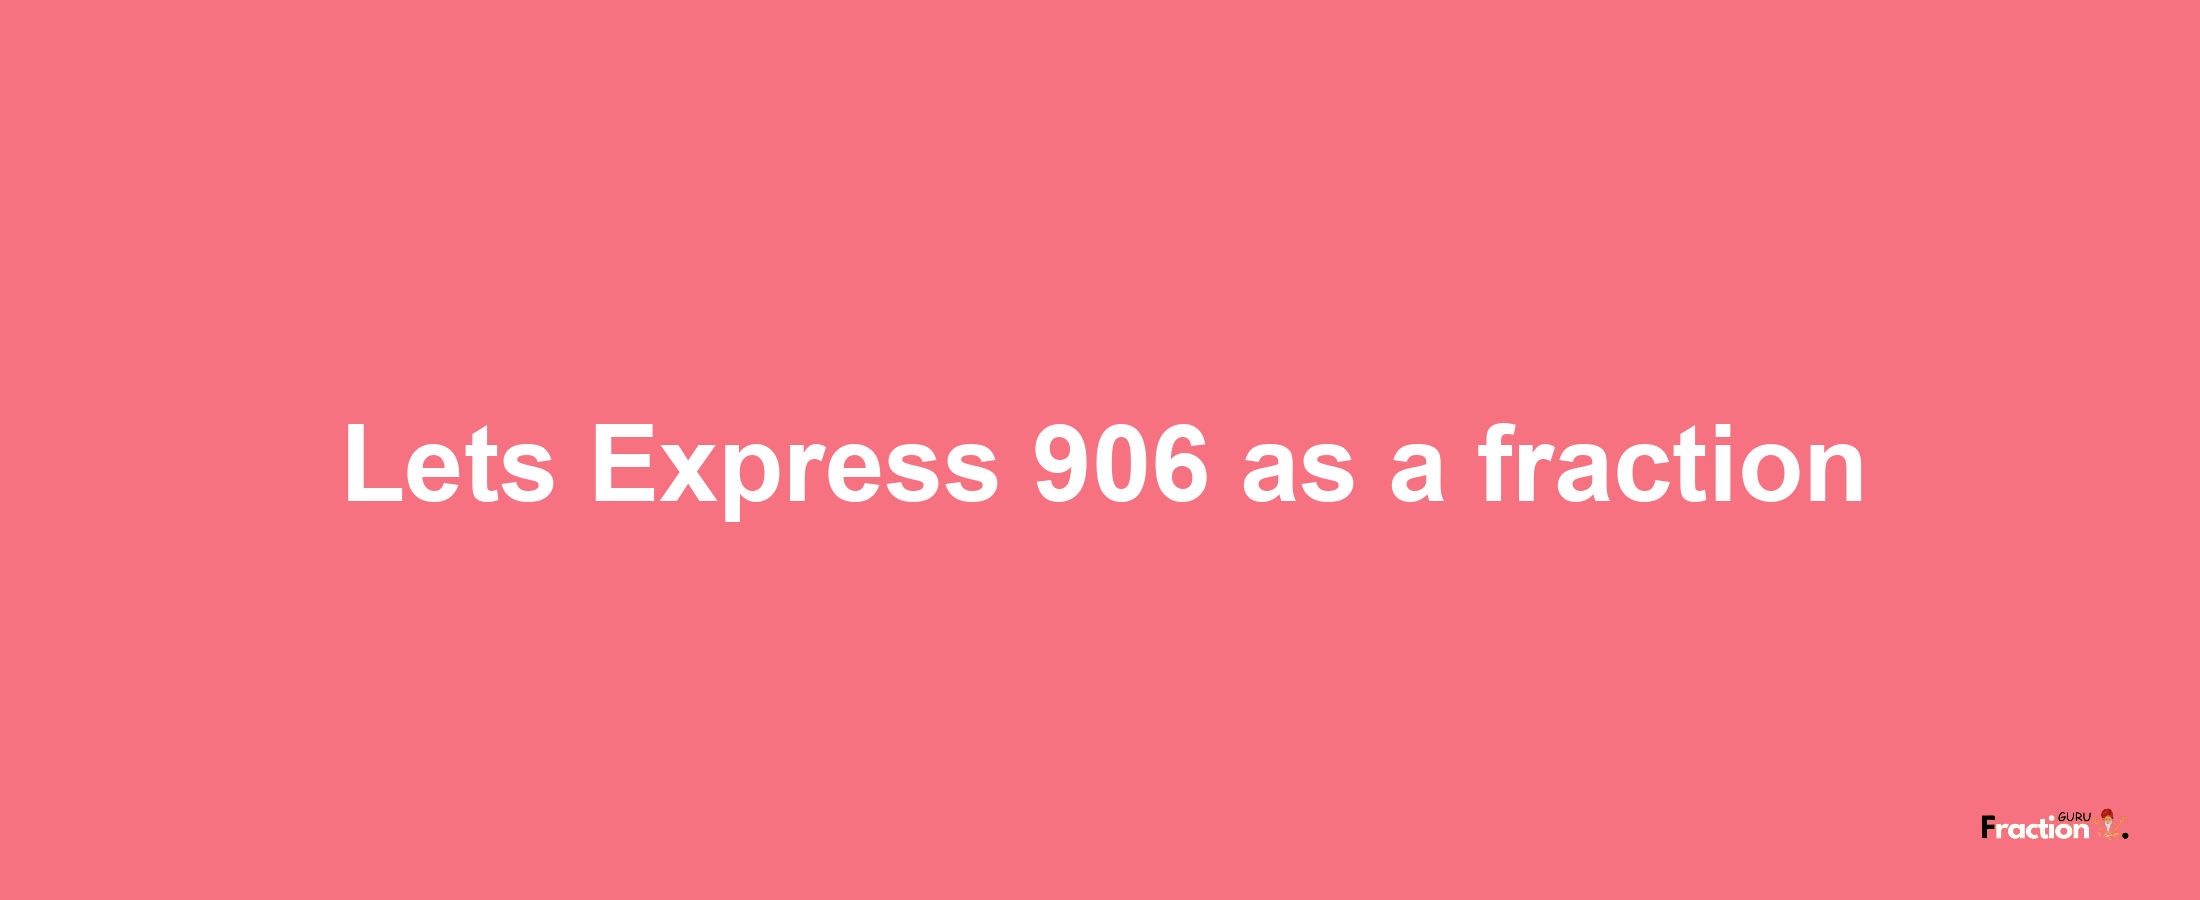 Lets Express 906 as afraction